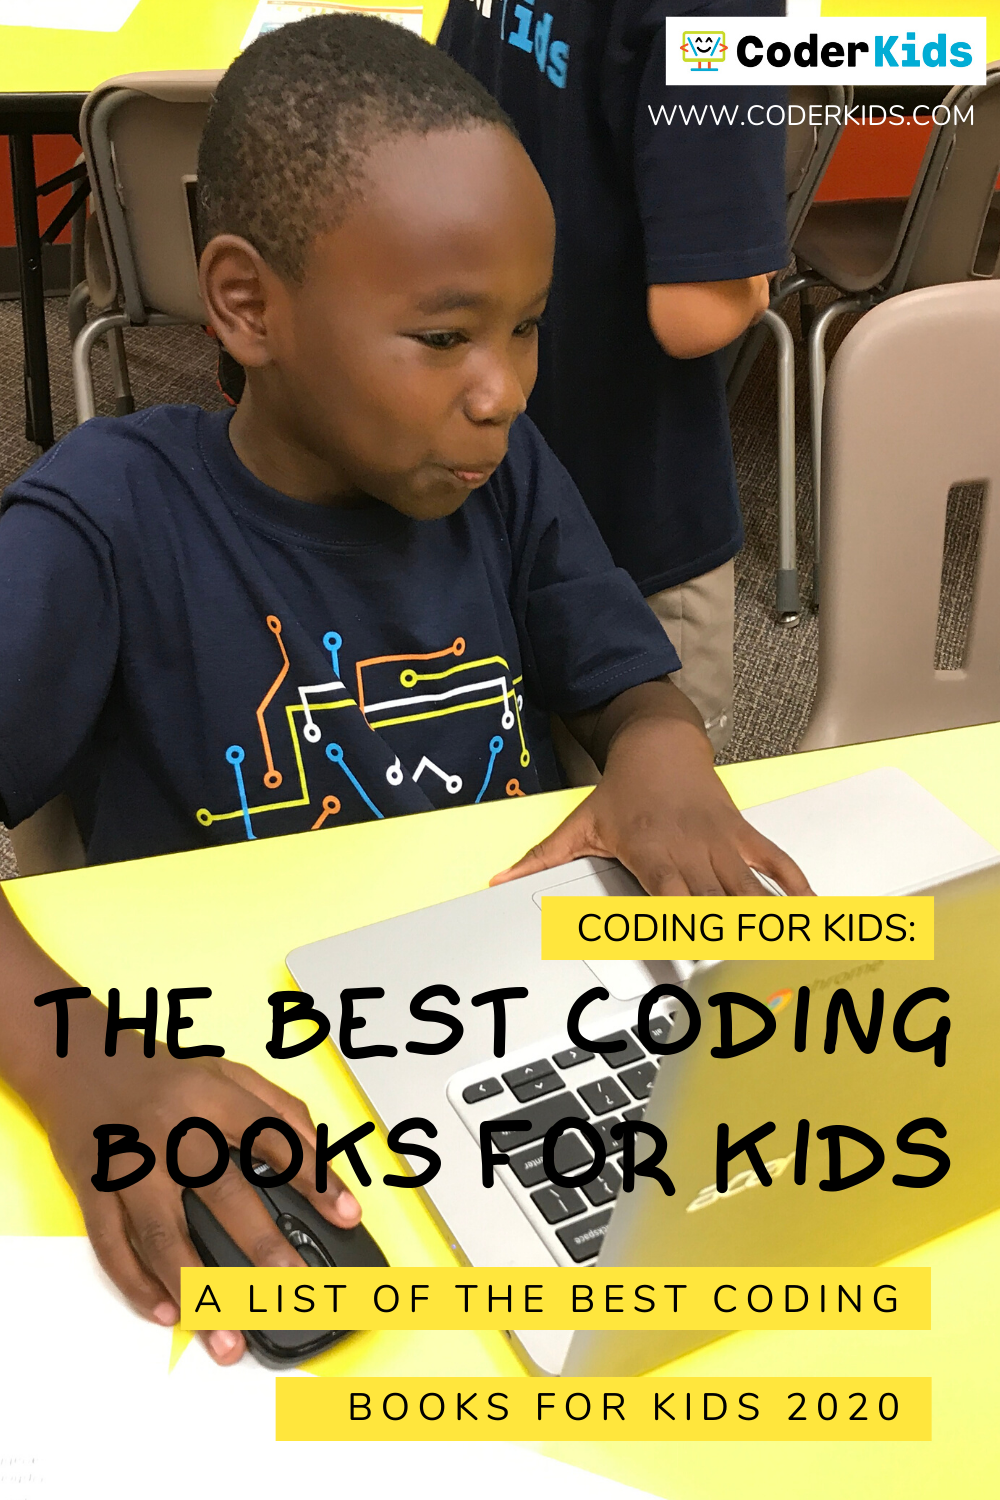 Book Reviews for Computer Coding Projects For Kids: A Step-by-Step Visual  Guide to Creating Your Own Scratch Projects By Carol Vorderman